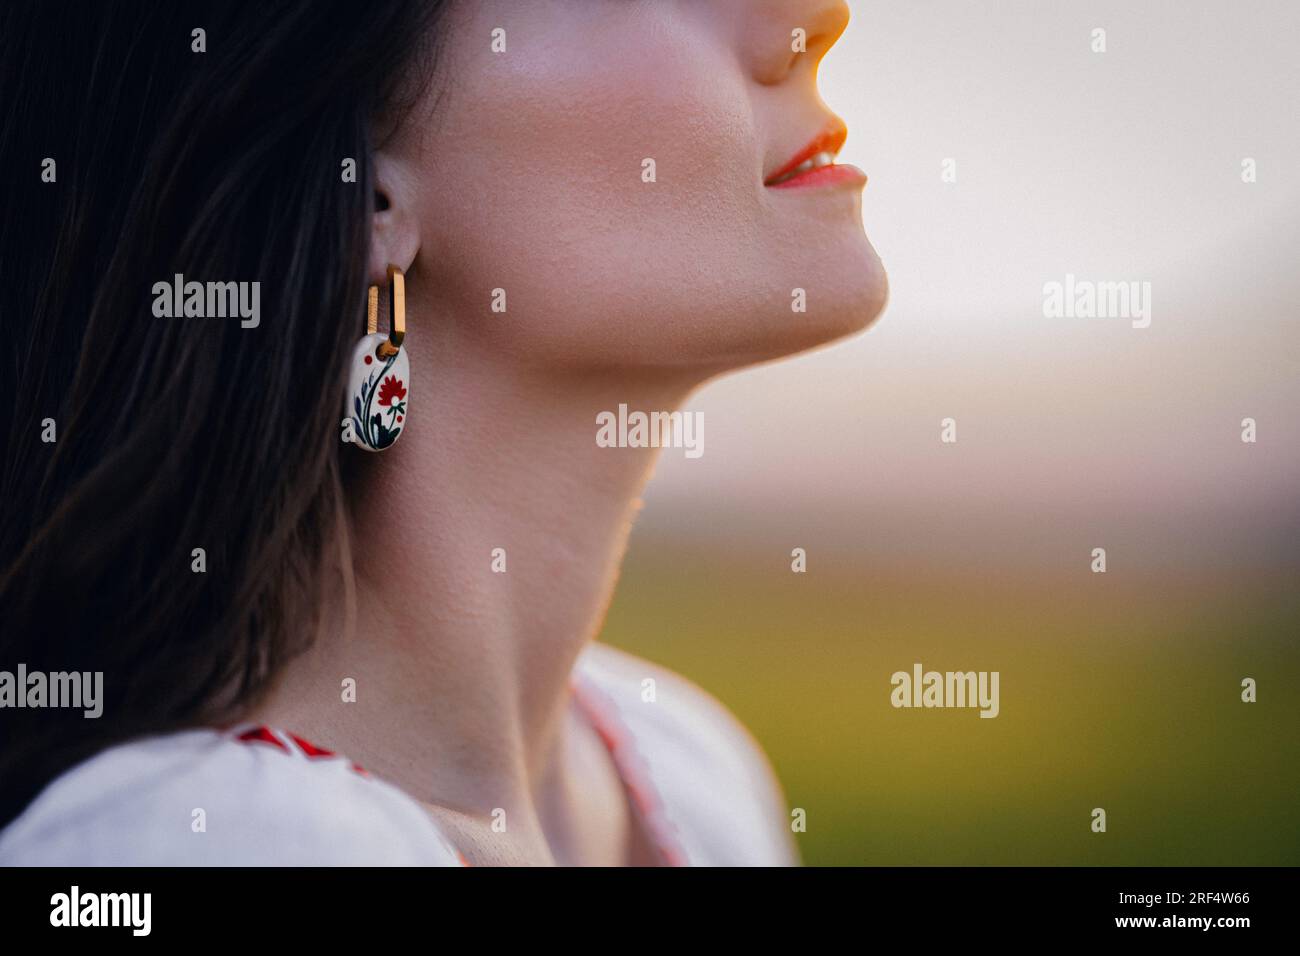 Young woman with ethnic earring and shirt with traditional ornaments breath free Stock Photo